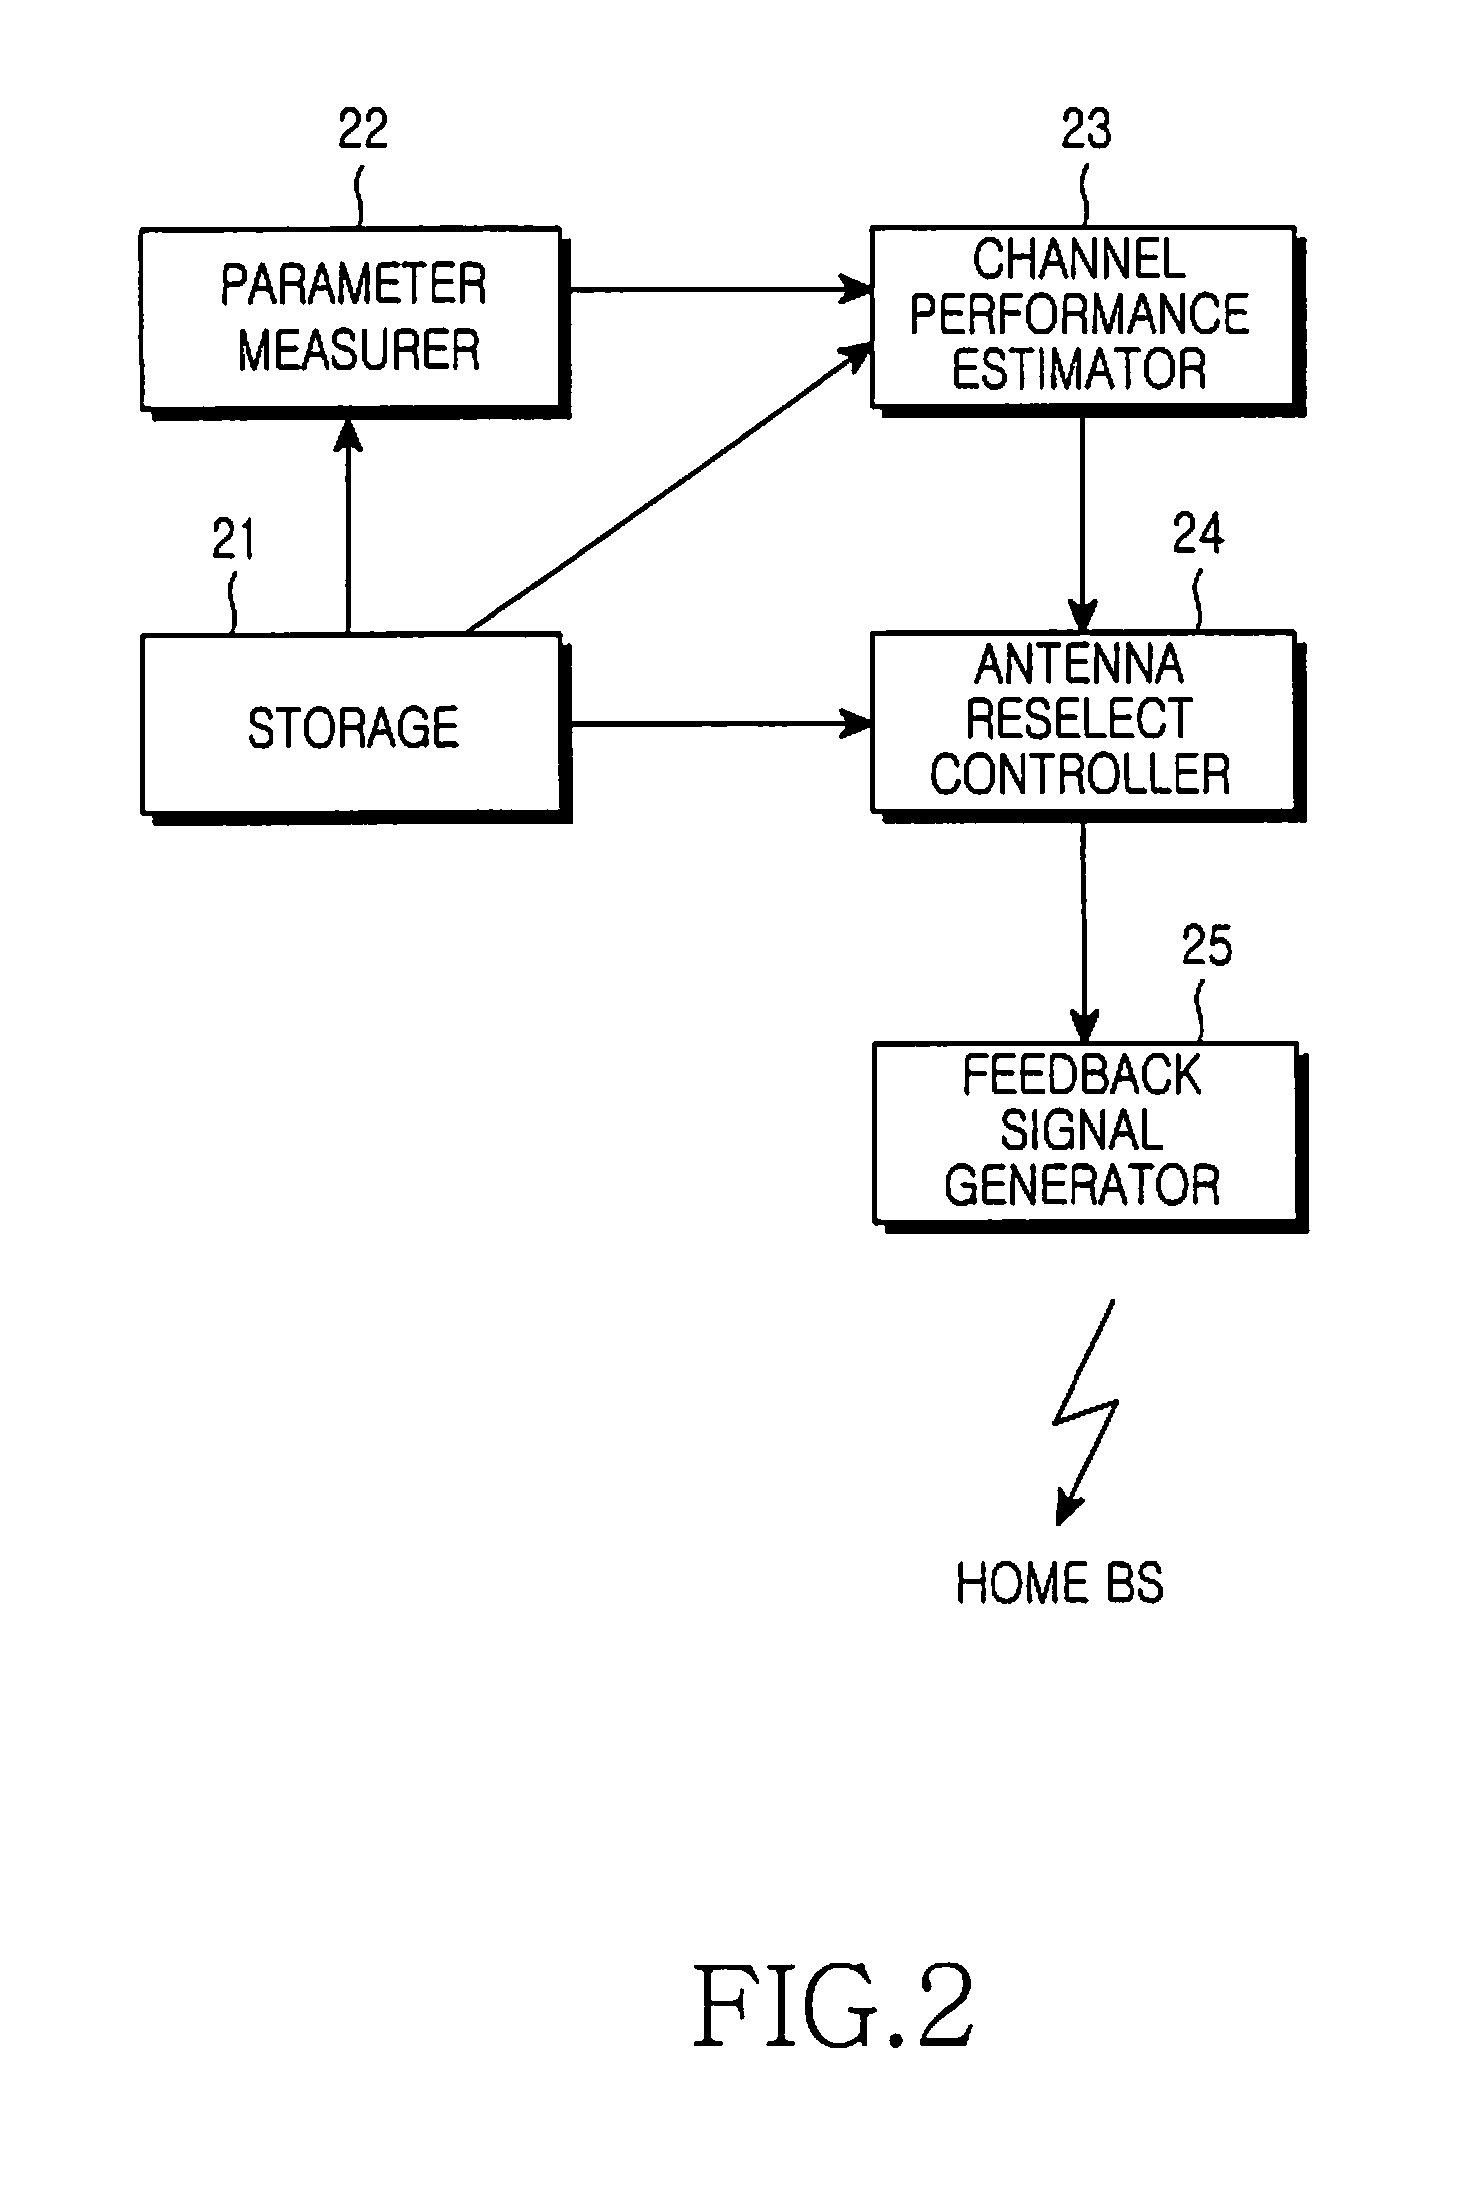 System and method for reselecting antennas in a cellular mobile communication system using multiple antennas